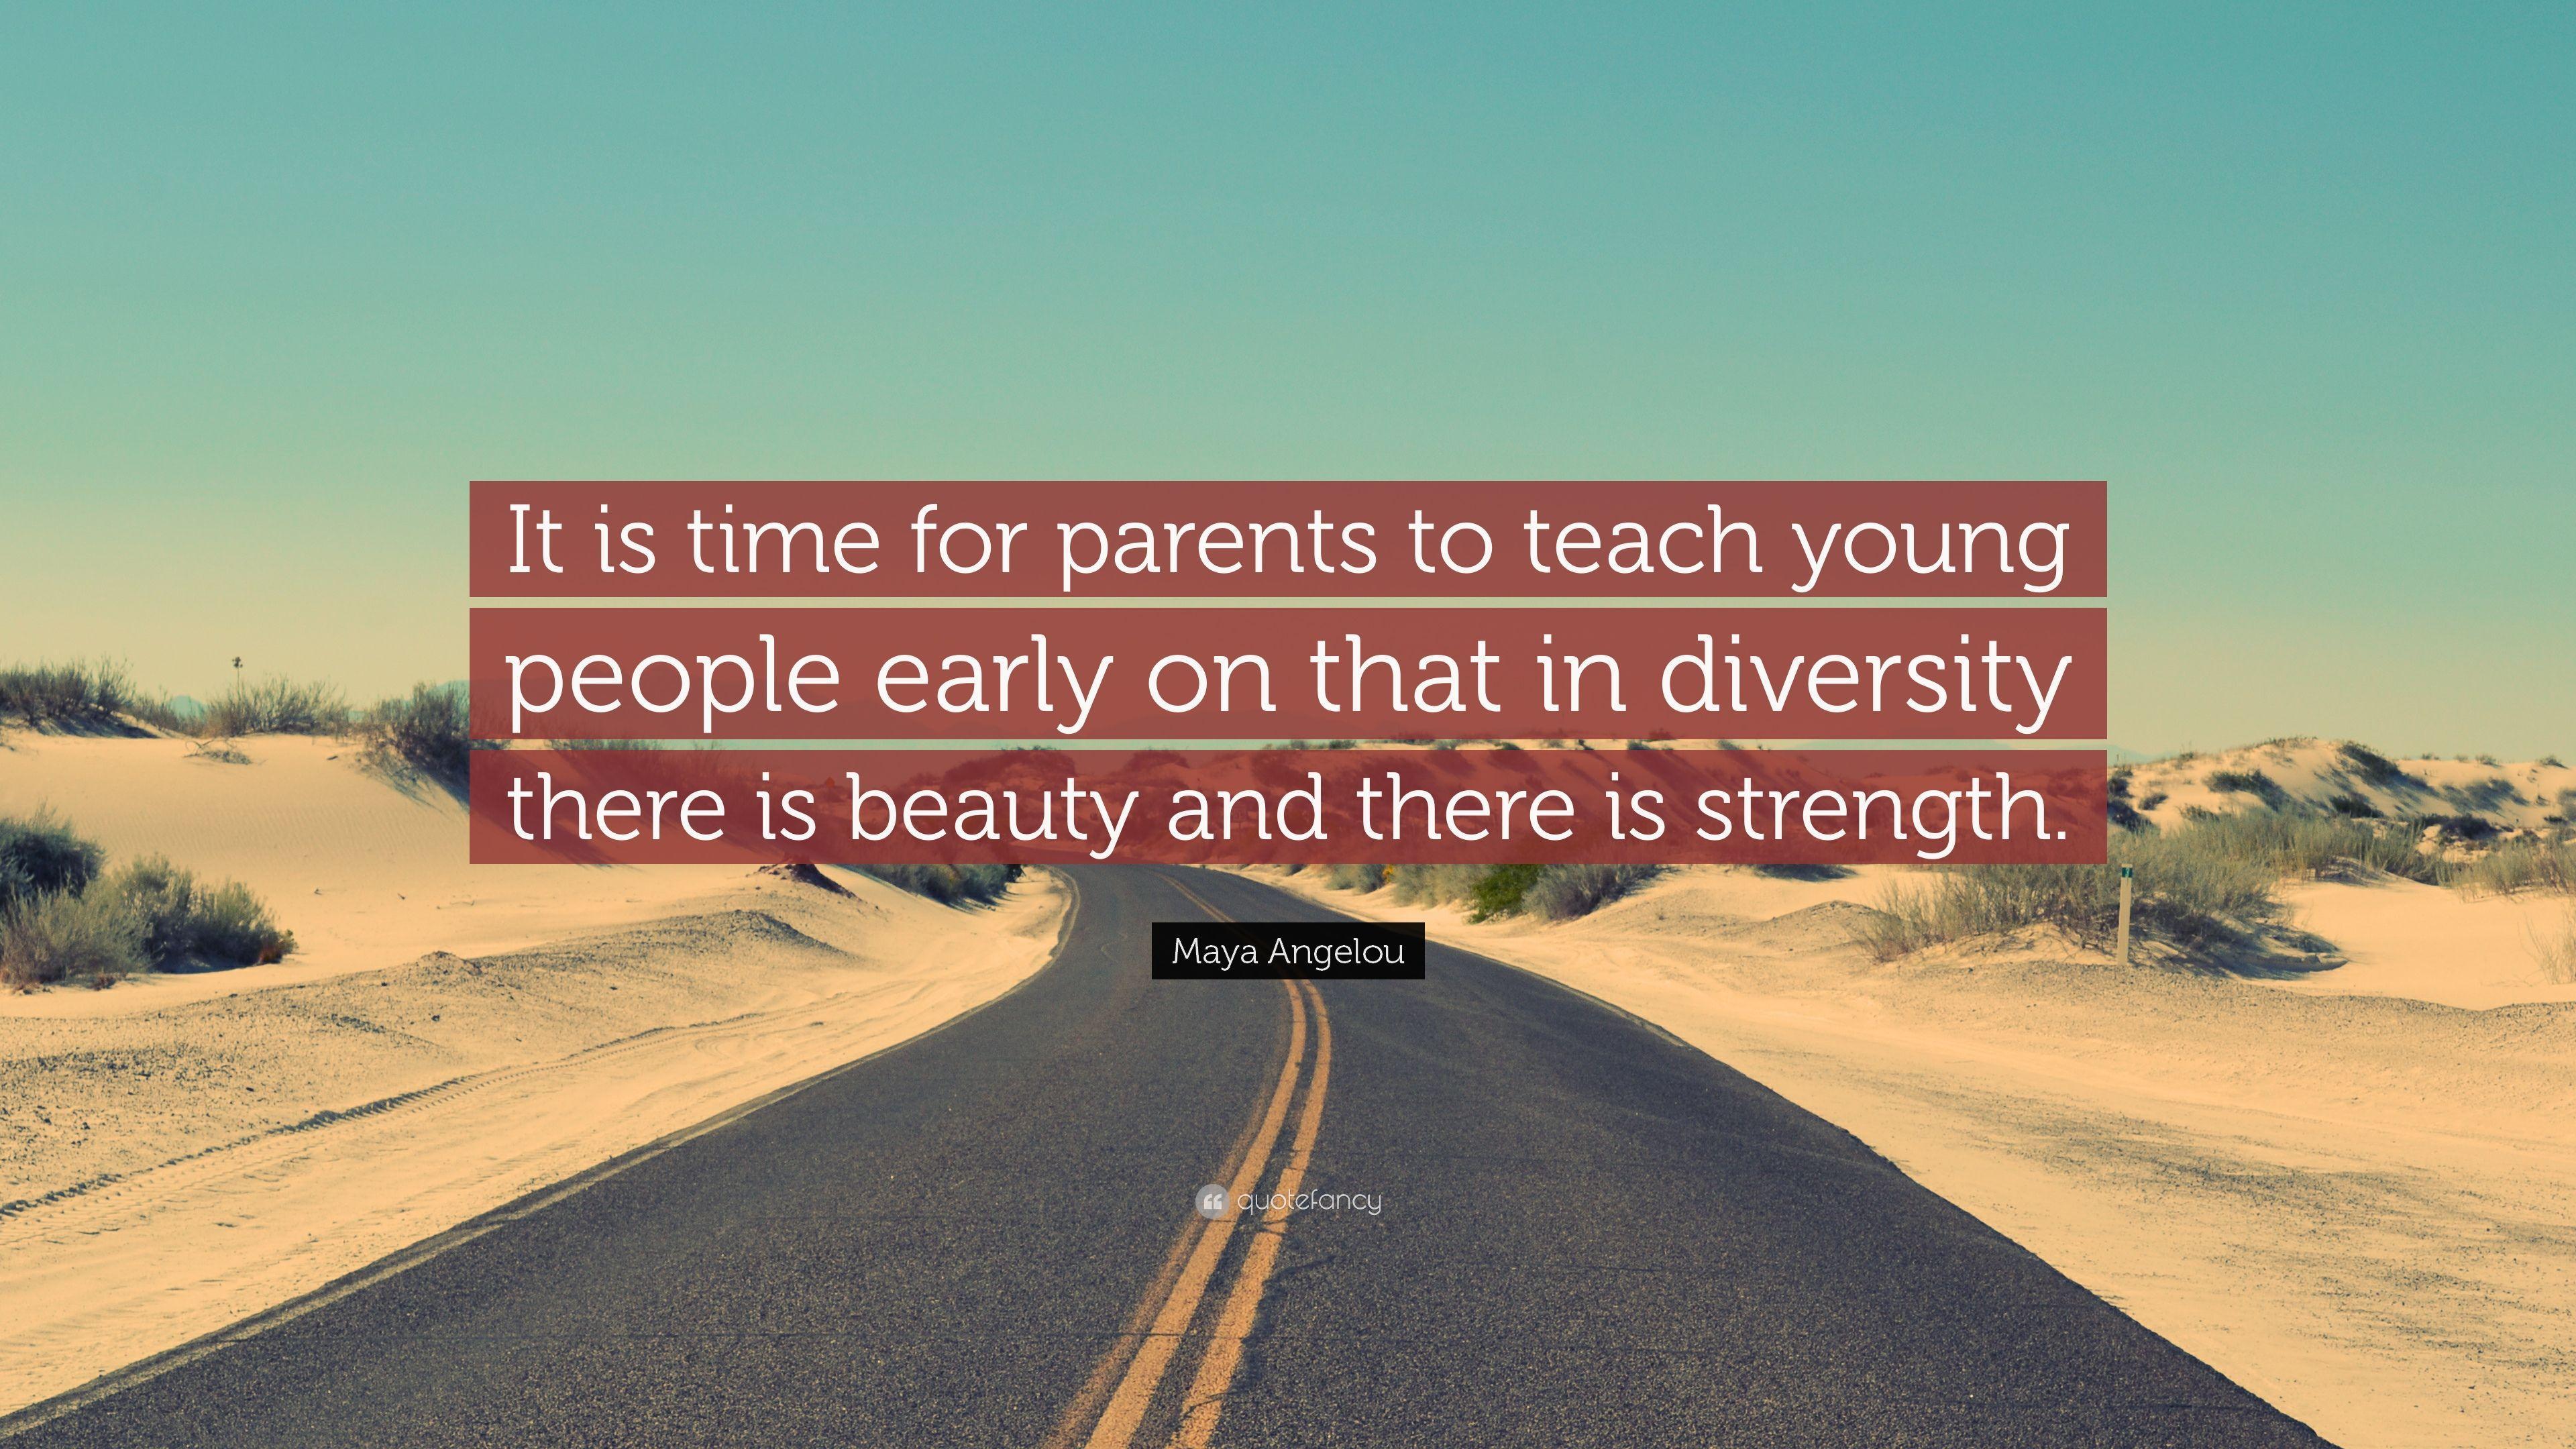 Maya Angelou Quote: “It is time for parents to teach young people